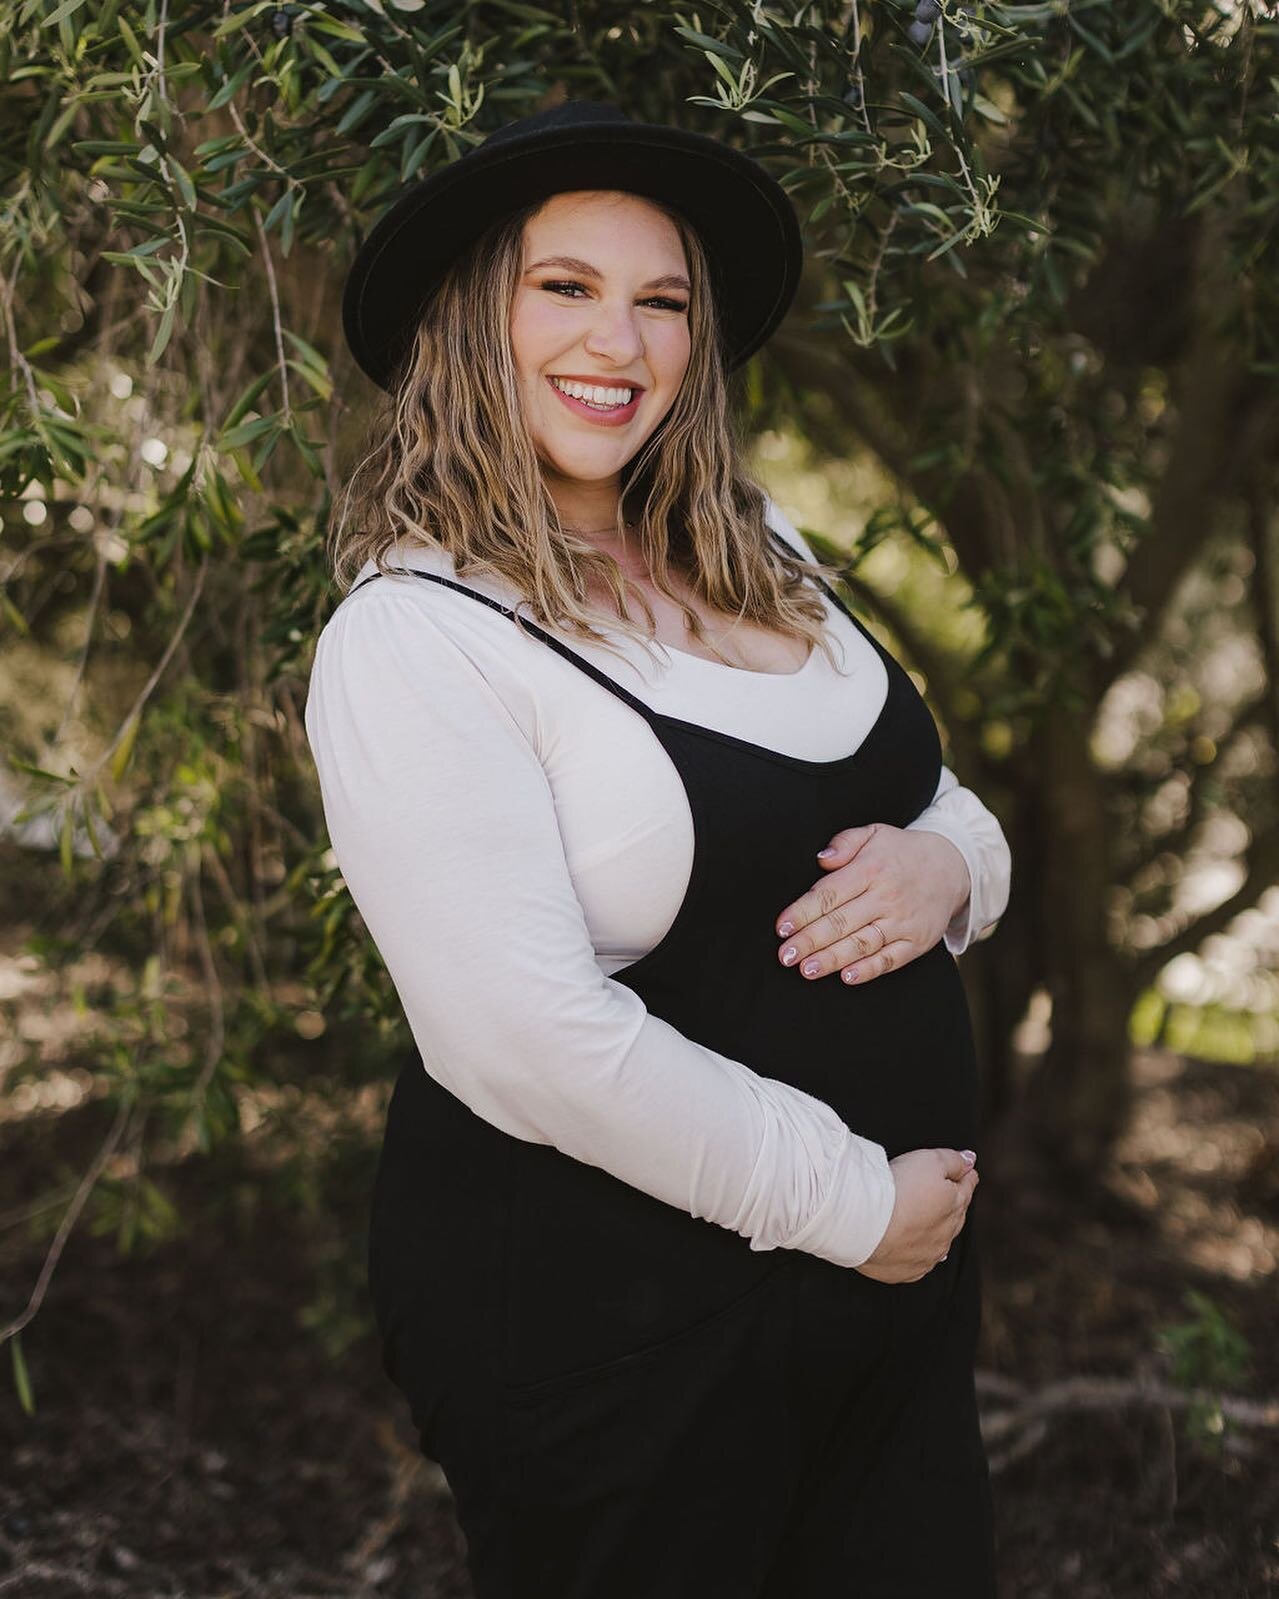 In case you haven&rsquo;t heard, surprise! I&rsquo;m pregnant! 💕

I&rsquo;ll be taking some time off toward the end of July, but will definitely be coming back to the studio! Get those facials in while you can! 😉

Thanks @sarahkathleenphoto for the